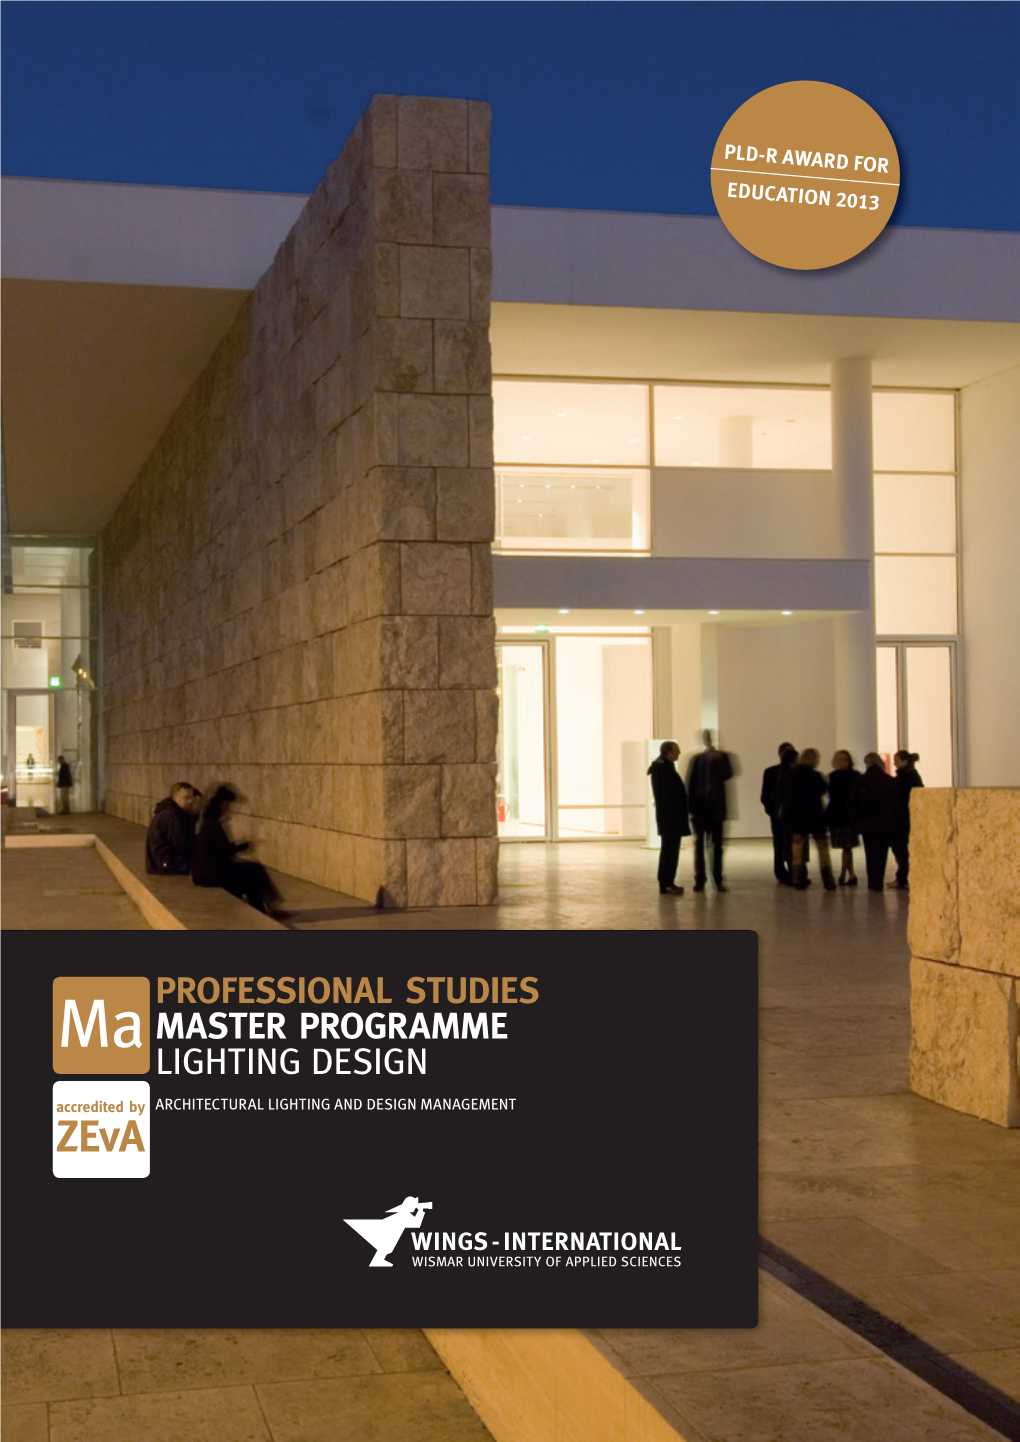 PROFESSIONAL STUDIES MASTER PROGRAMME LIGHTING DESIGN Accredited by ARCHITECTURAL LIGHTING and DESIGN MANAGEMENT Zeva